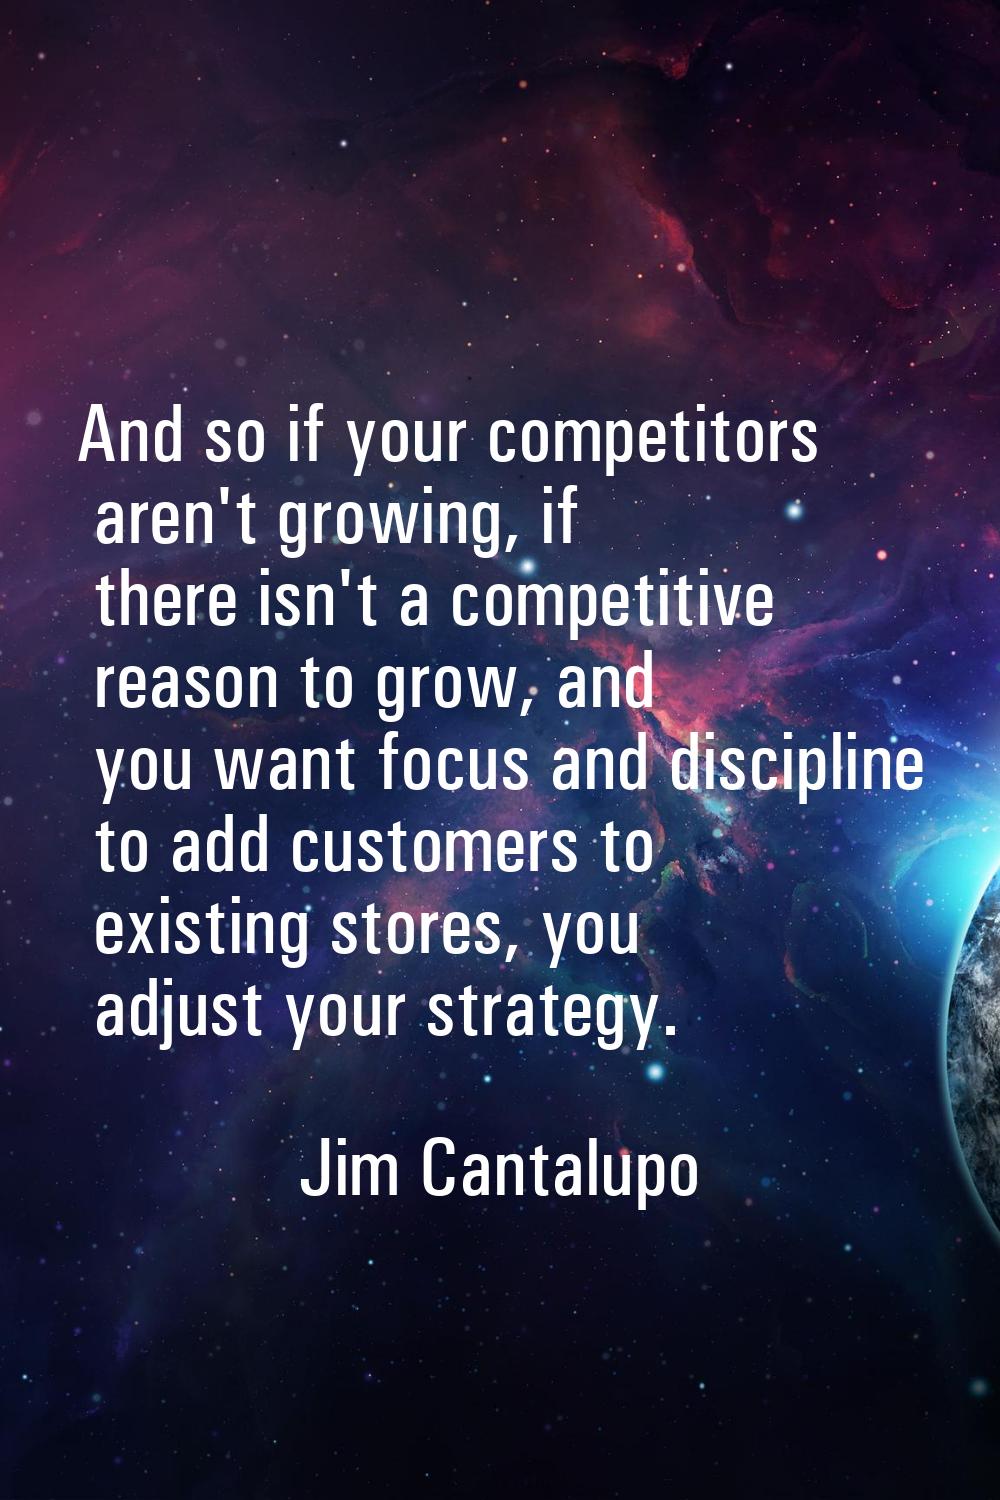 And so if your competitors aren't growing, if there isn't a competitive reason to grow, and you wan